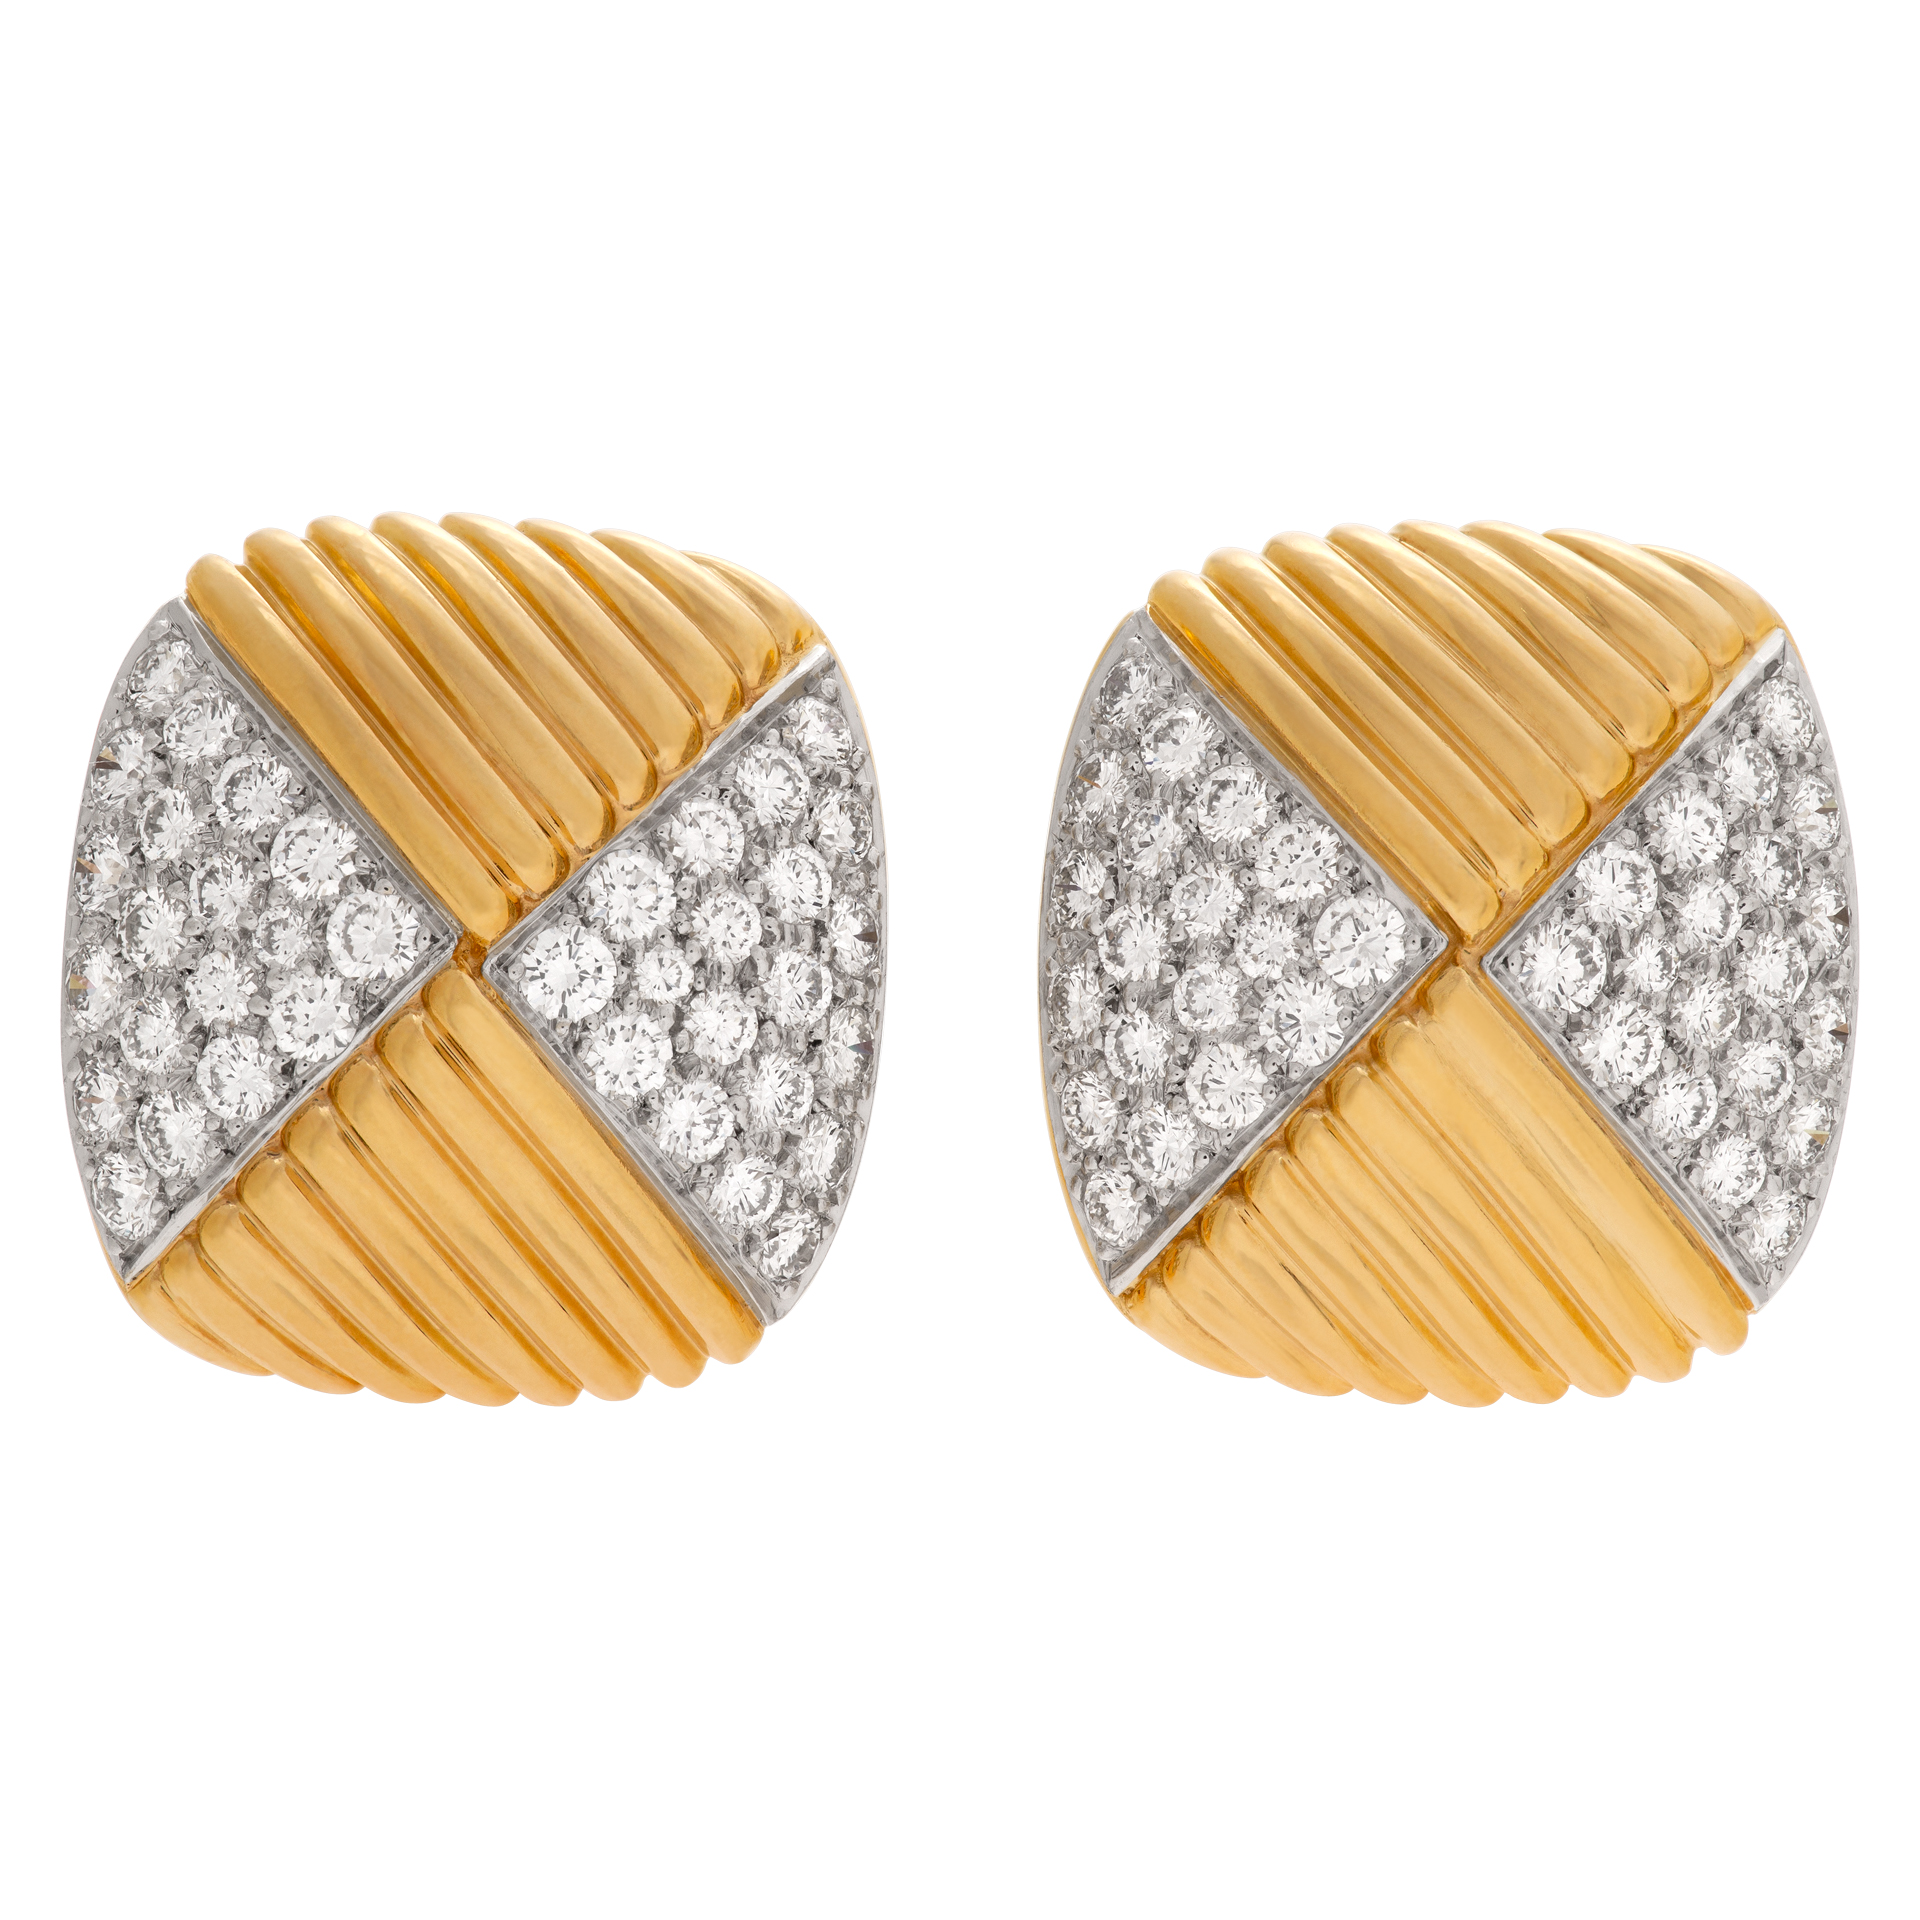 Geometric earrings in 18k with pave diamonds image 1